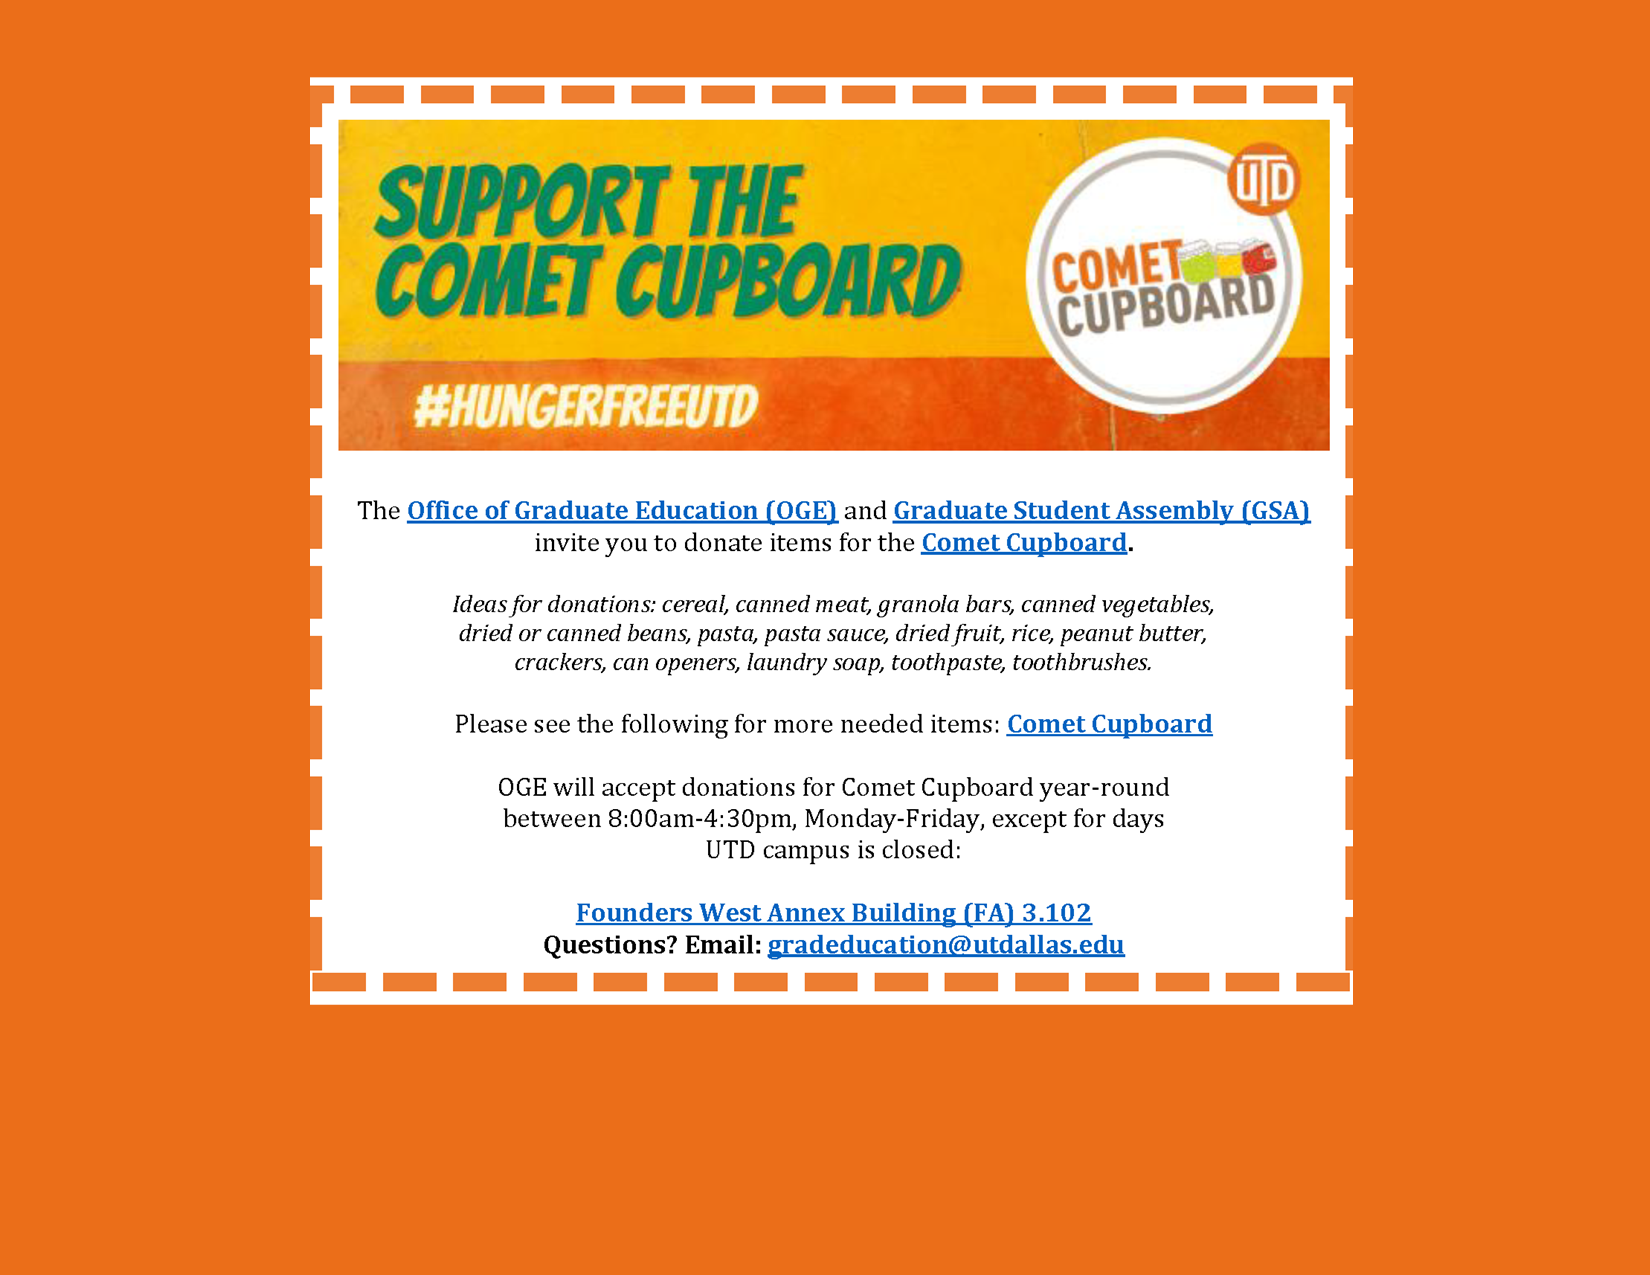 Read more about Comet Cupboard